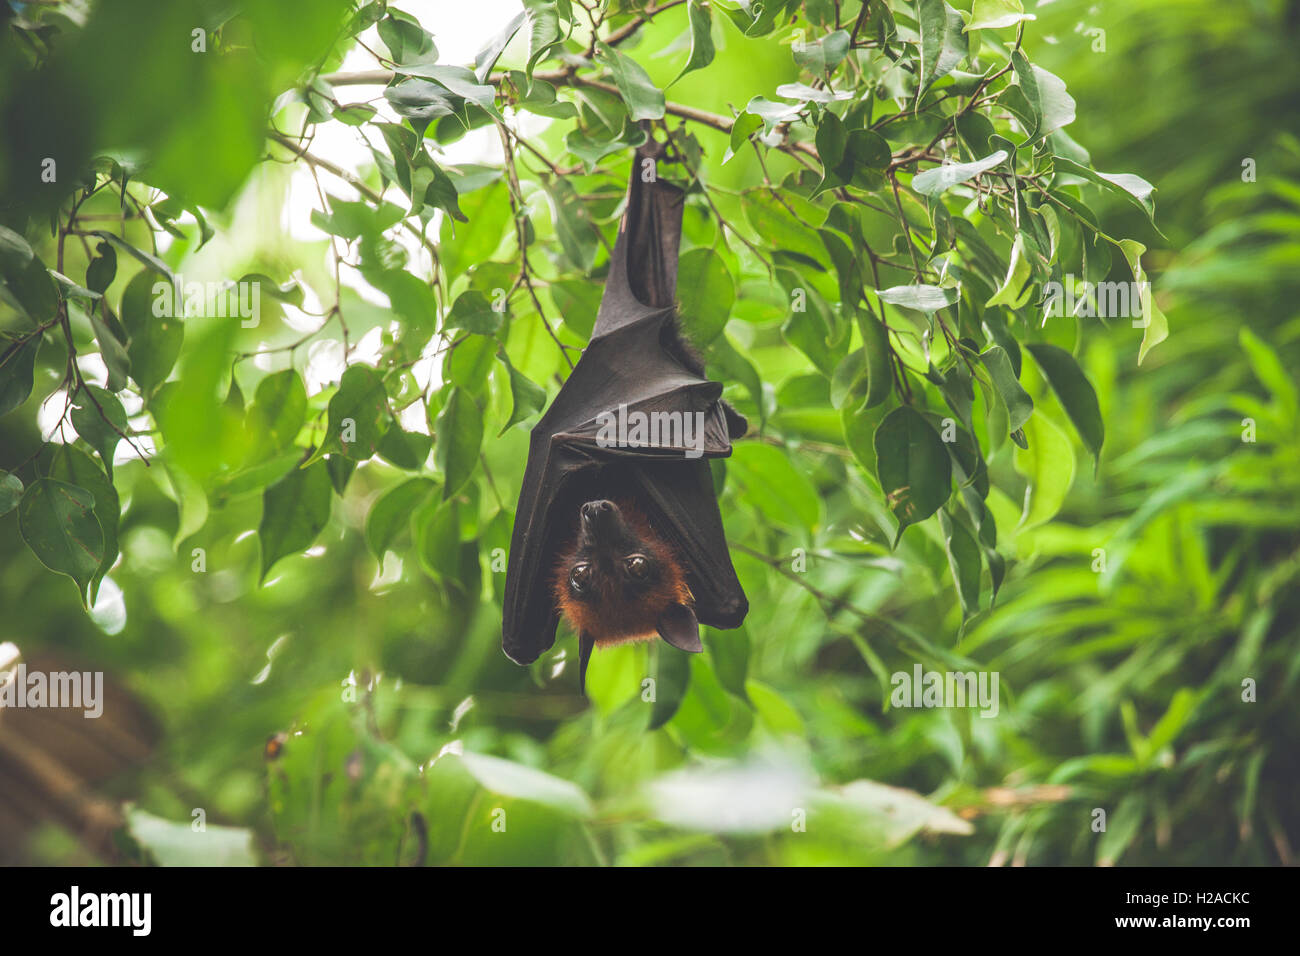 Bat hanging upside down in a green rainforest in daylight Stock Photo